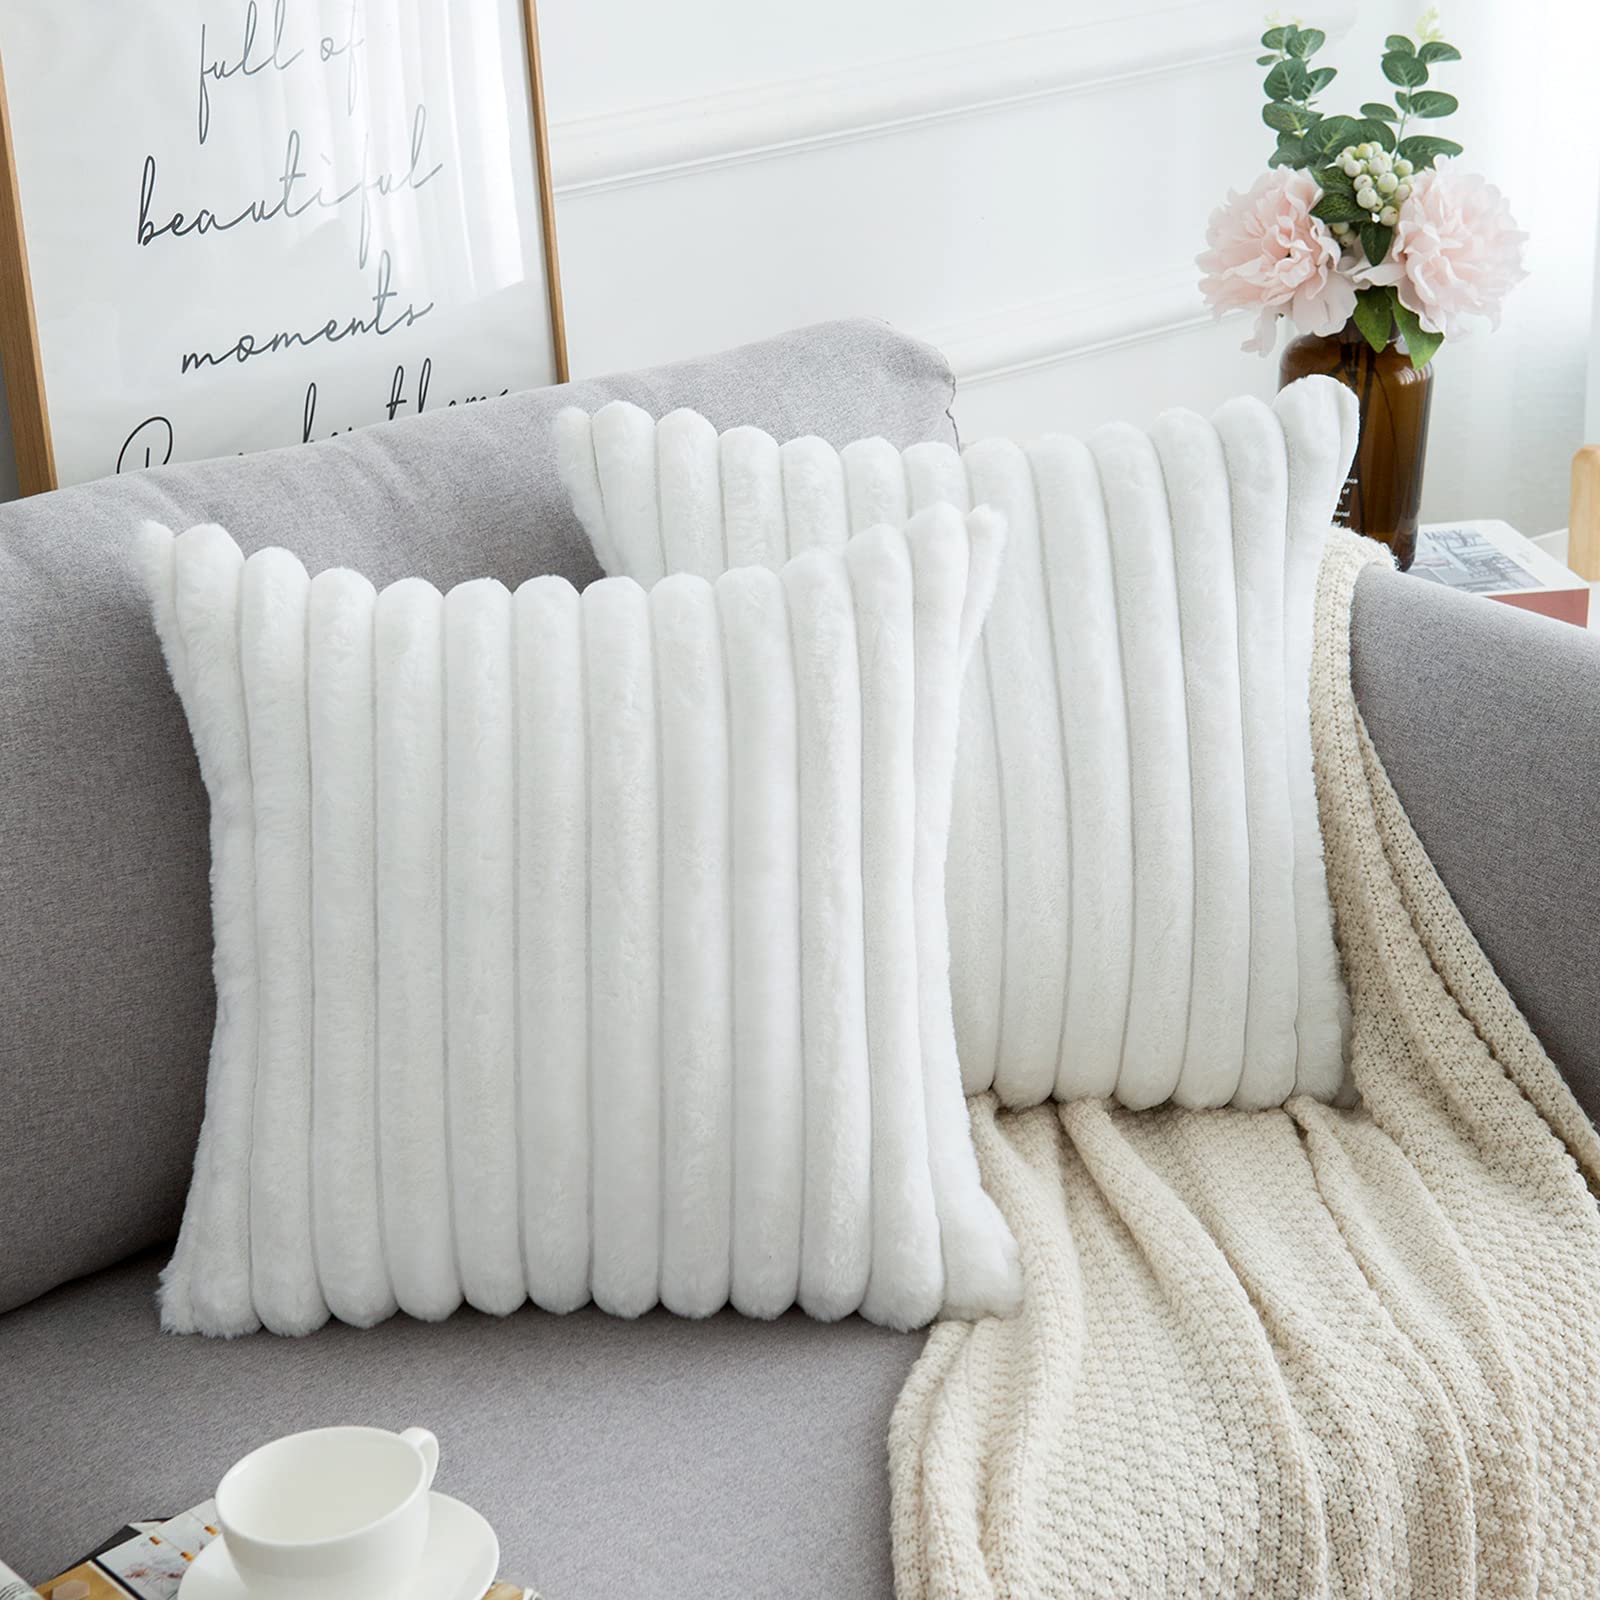 Cushion Covers 45 x 45 cm Faux Fur White Throw Pillow Cover Set of 2 Fluffy Soft Square Pillowcases for Bed Room Sofa Home Decor Couch Cushion Cover